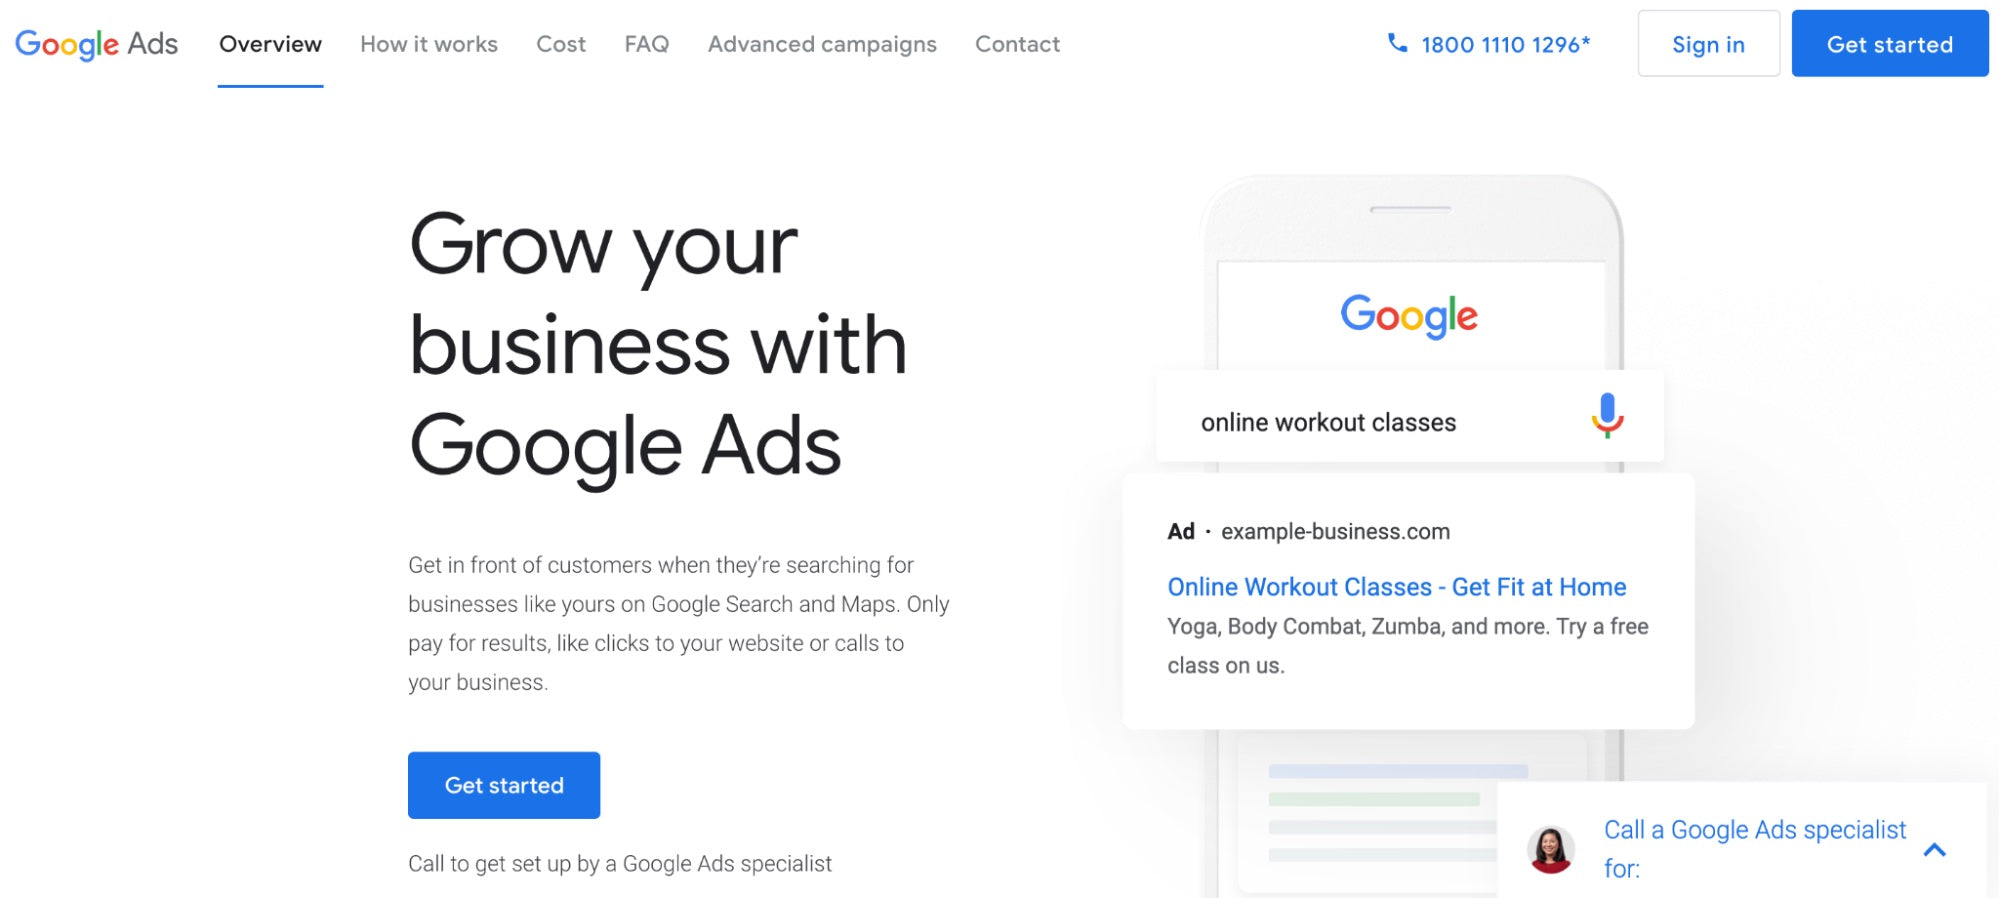 Google Ads Overview page